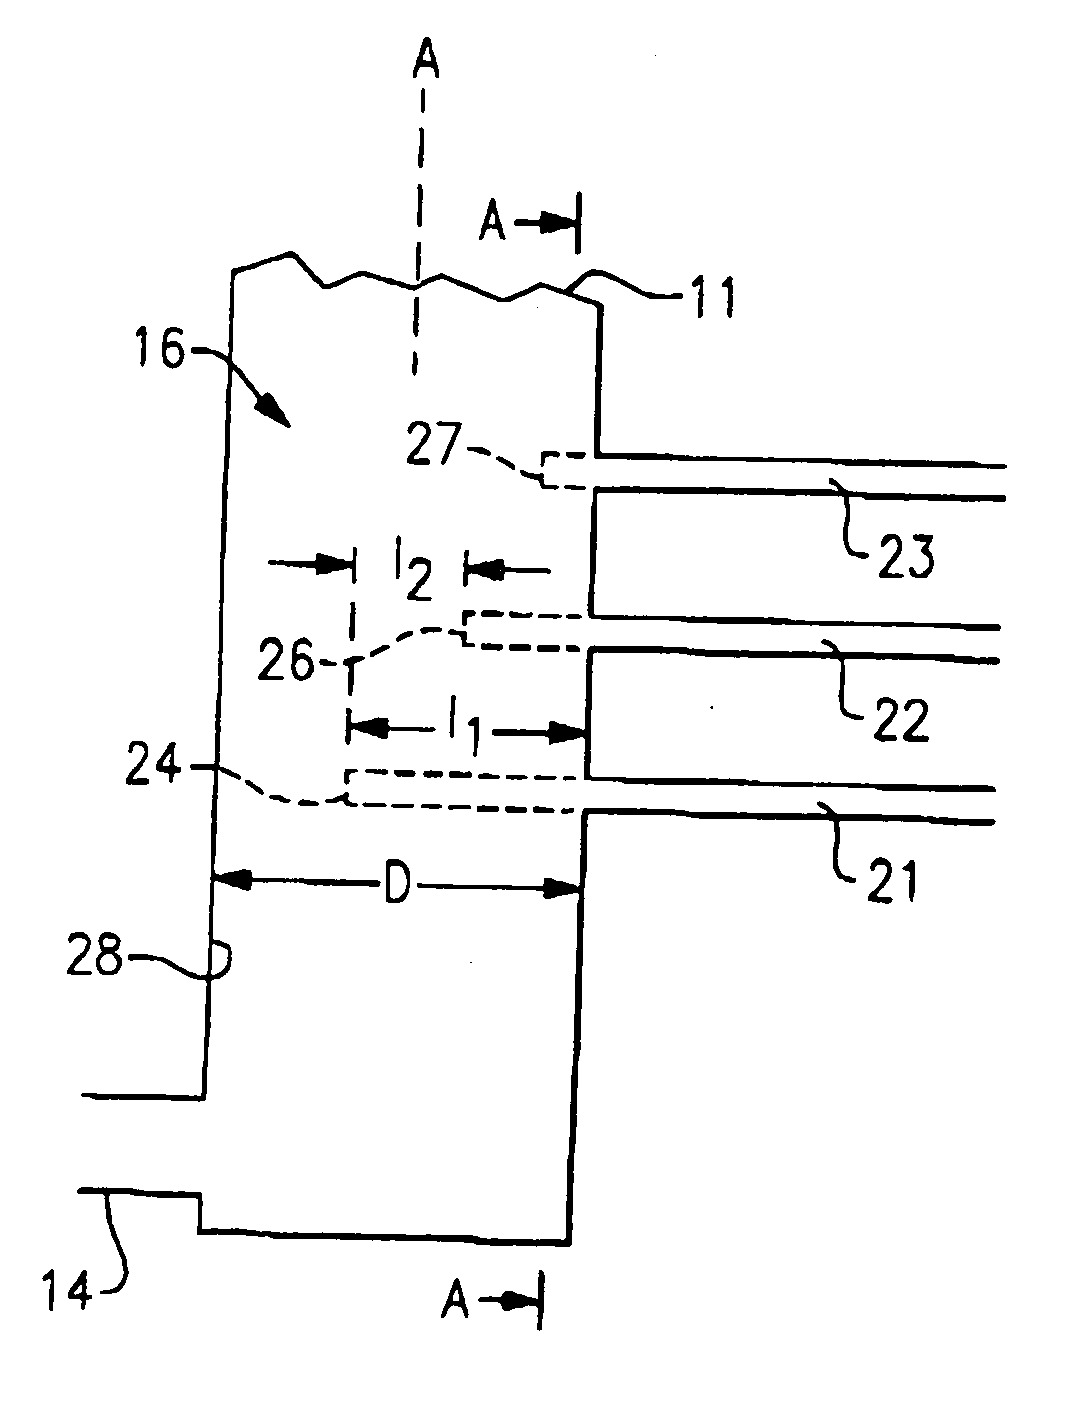 Parallel flow evaporator with variable channel insertion depth